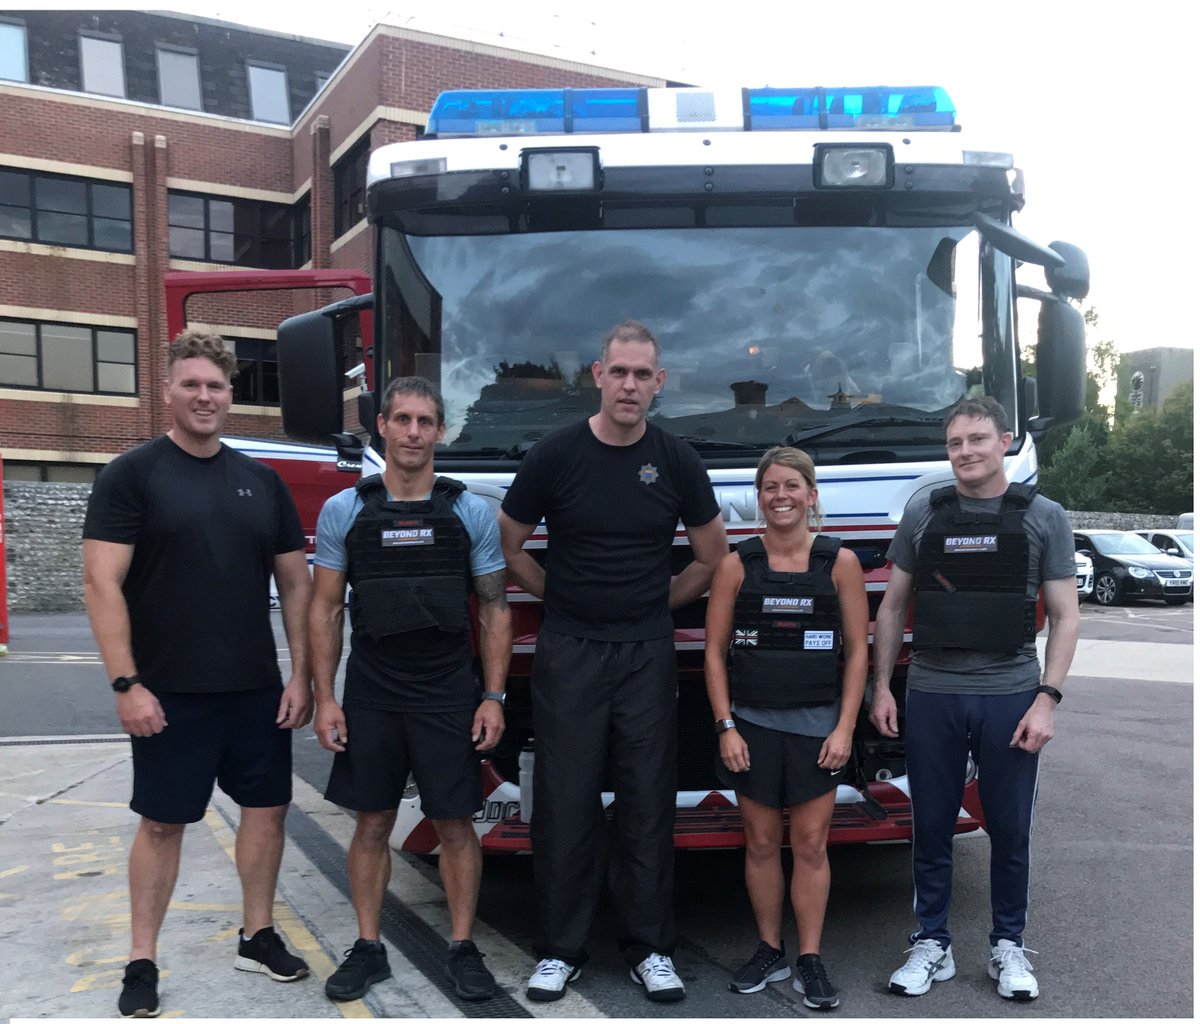 1 mile run 🏃‍♀️ 100 pull ups 🏋️‍♂️ 200 push-ups 💪 300 squats🧎 1 mile run 🏃‍♂️ Repeat for 12 hours while wearing 10kg weighted vest @LittlehamptonFS Blue Watch are going all out to support 2-year-old George and @firefighters999 More here 👇 westsussex.gov.uk/news/firefight…